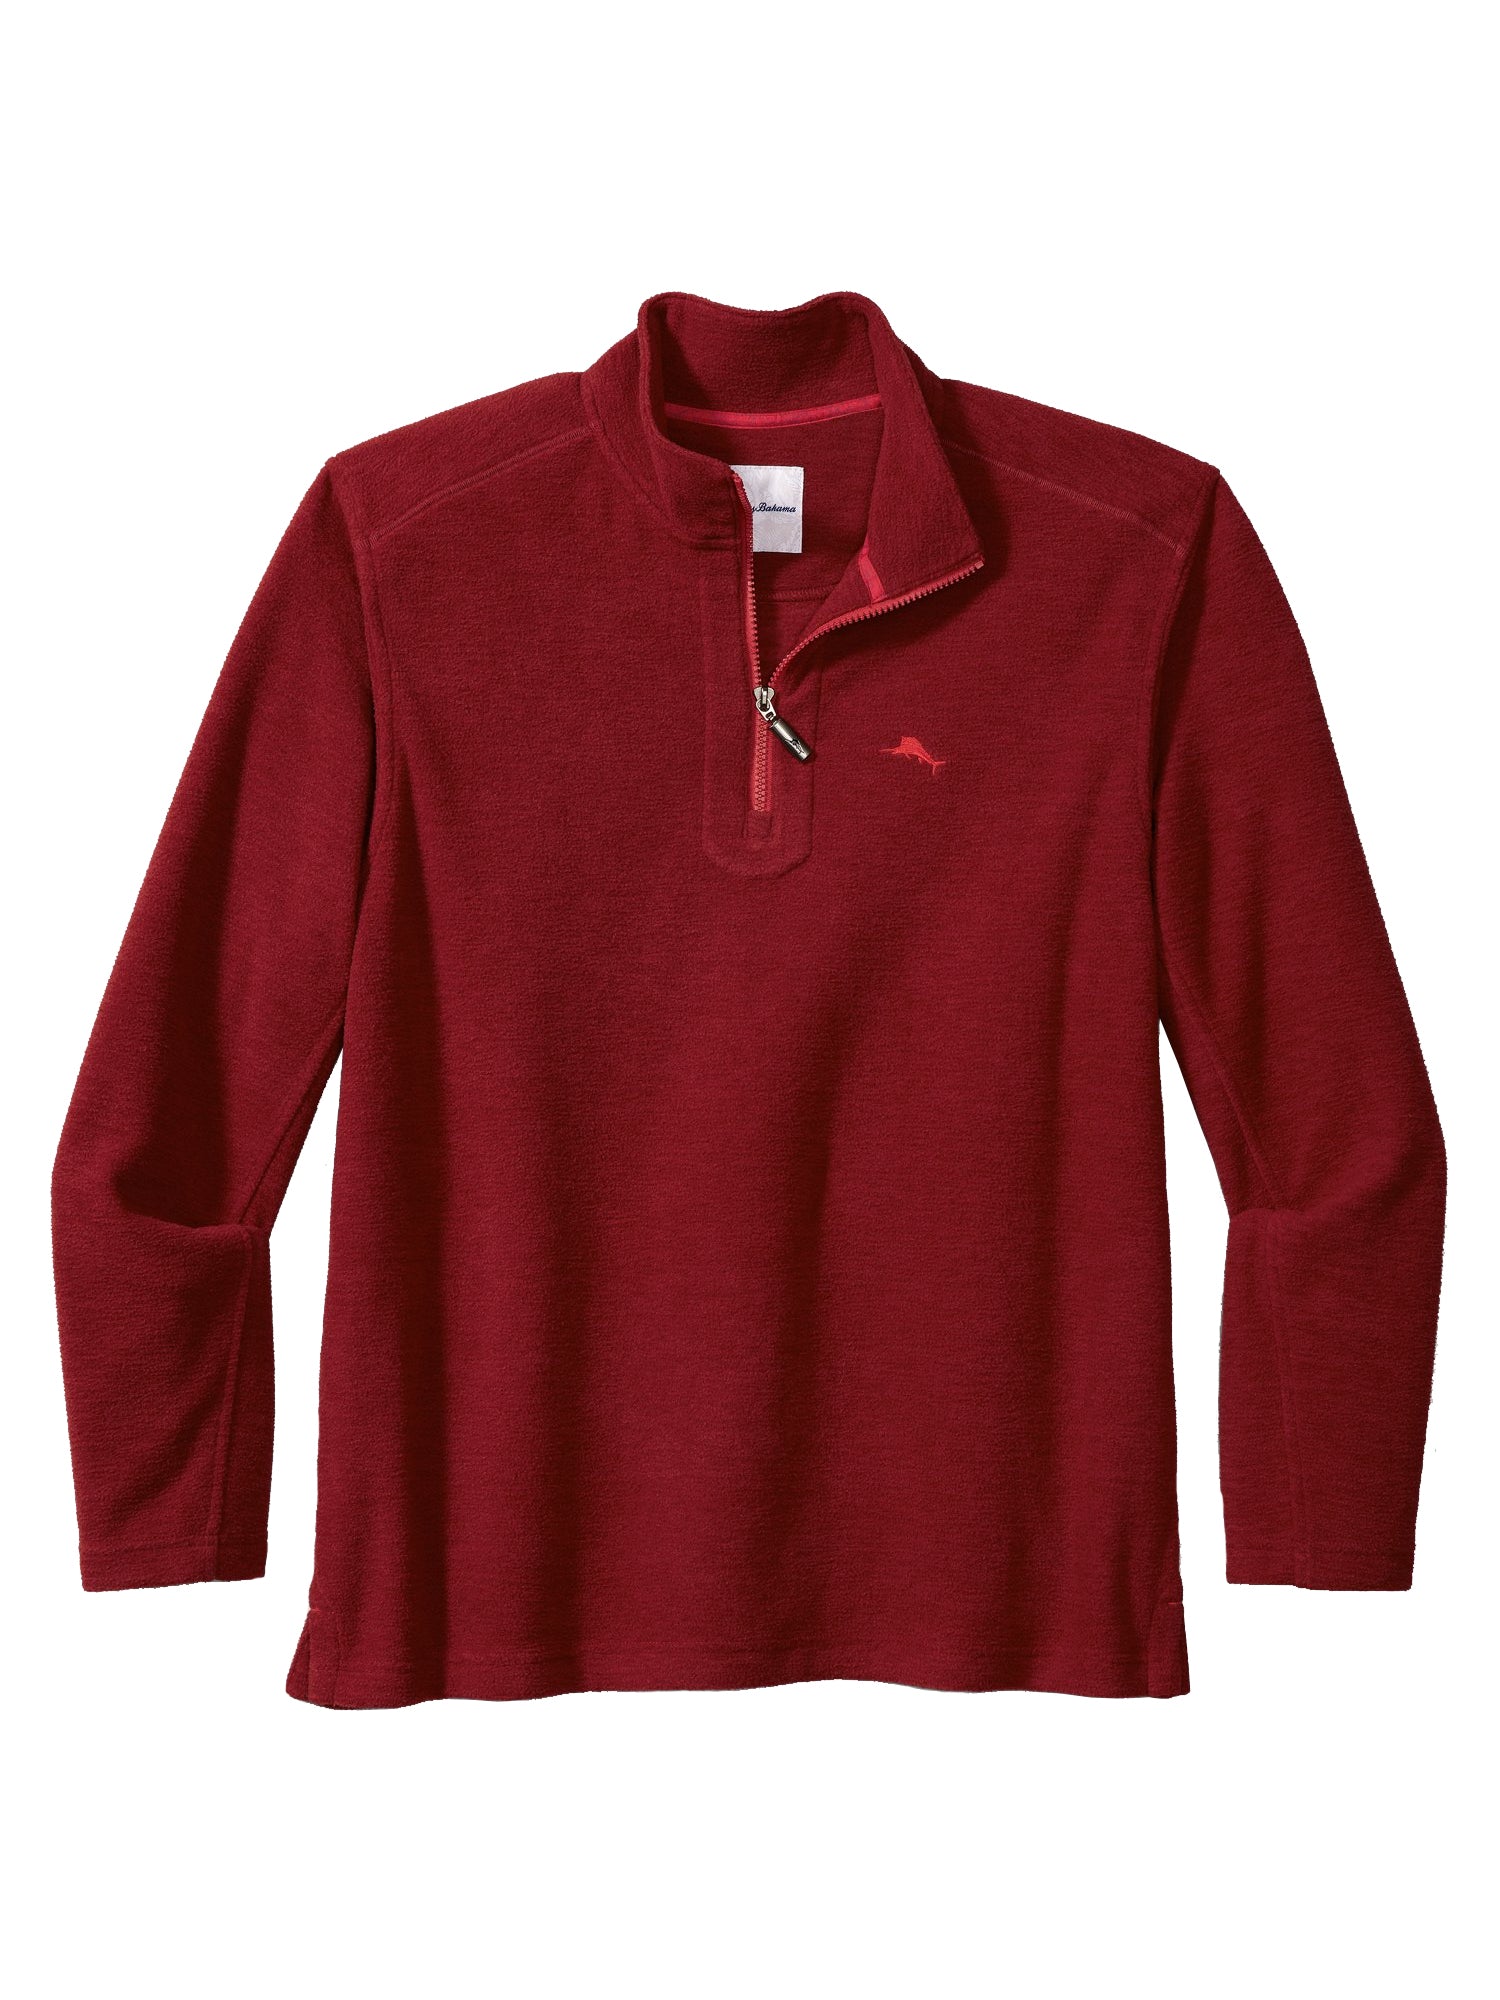 Tommy Bahama Cloud Peak 1/2 Zip in Sangria Red - Tall Sizes